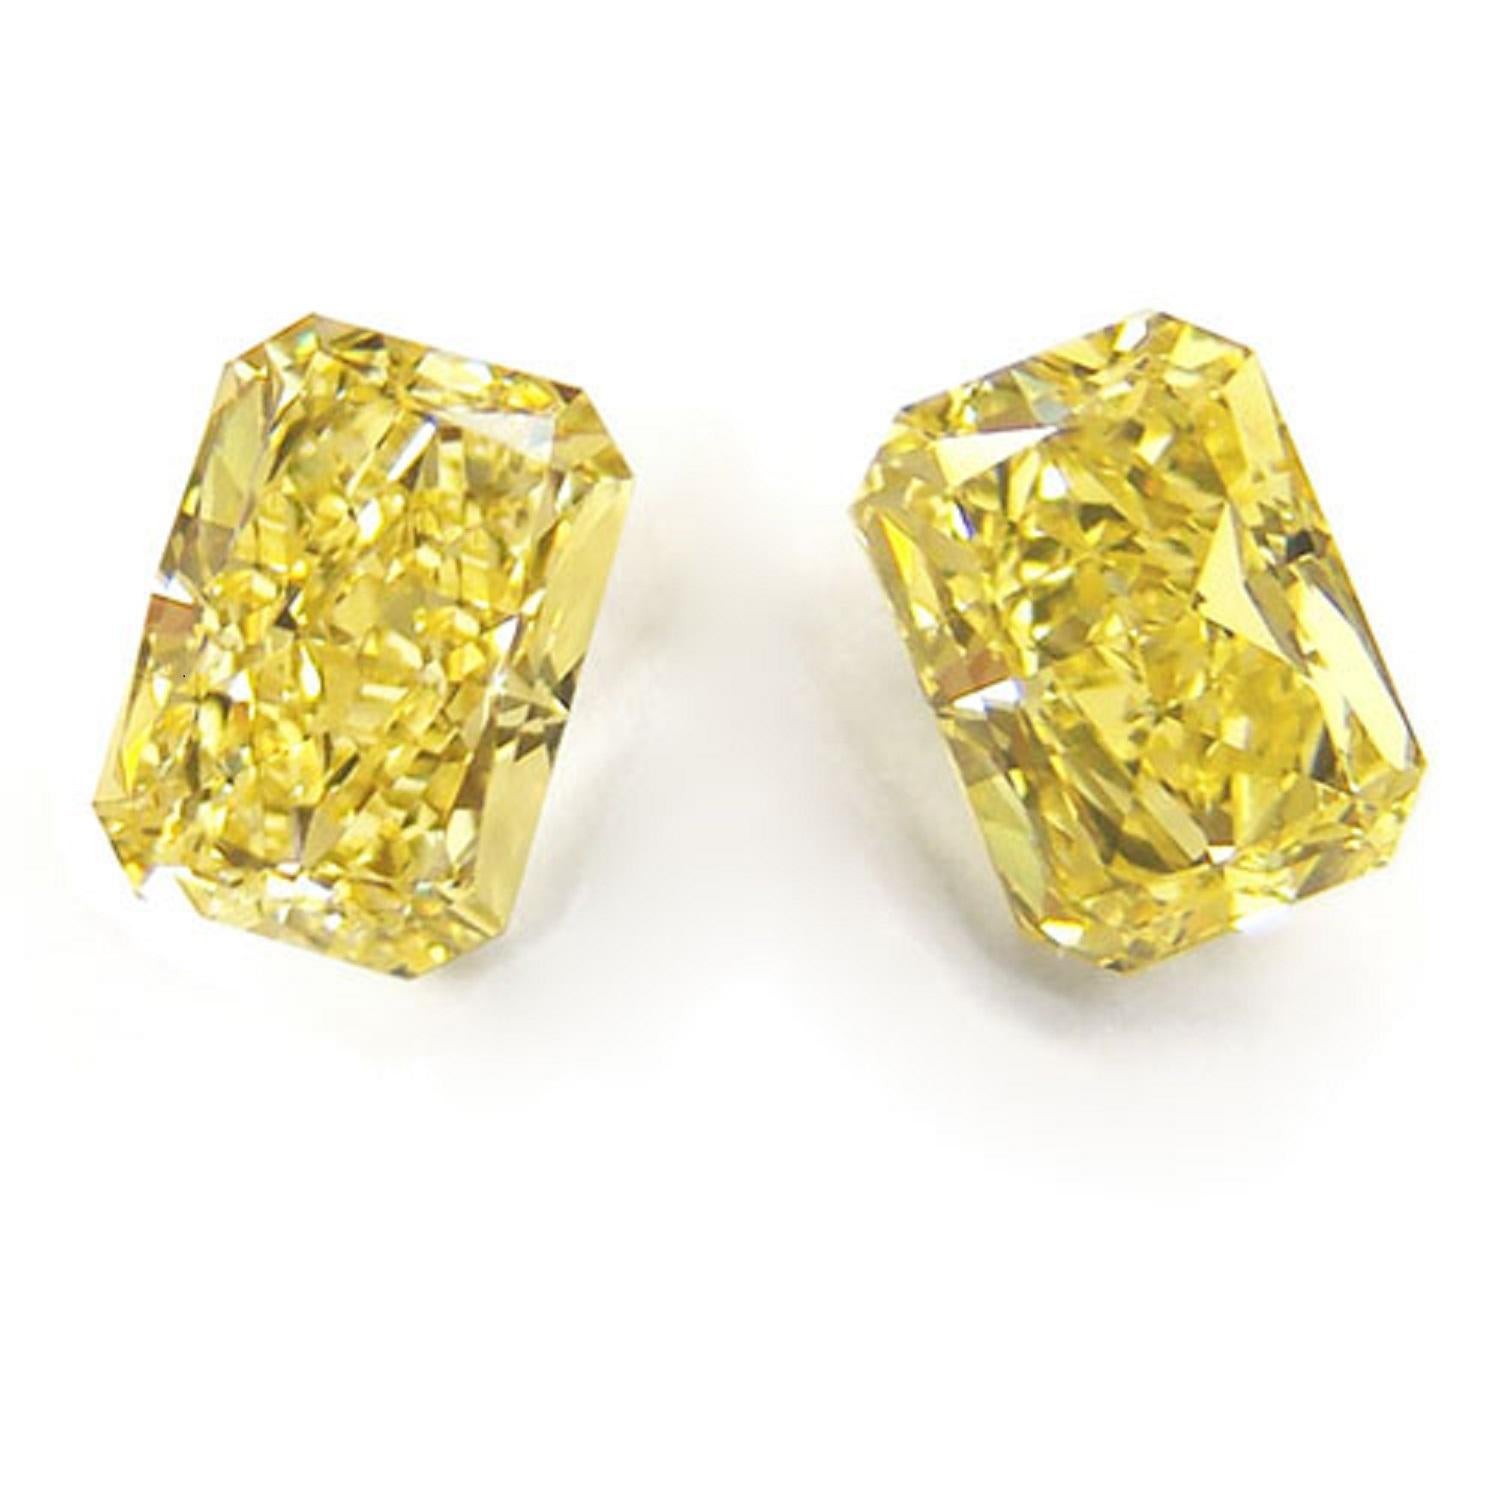 Stunning and substantial 2.58 carat pair of radiant cut diamonds is completely eye clean, displays gorgeous, cheery yellow color, and sparkles with fantastic brilliance! The diamonds are both certified by GIA, the world’s premier gemological